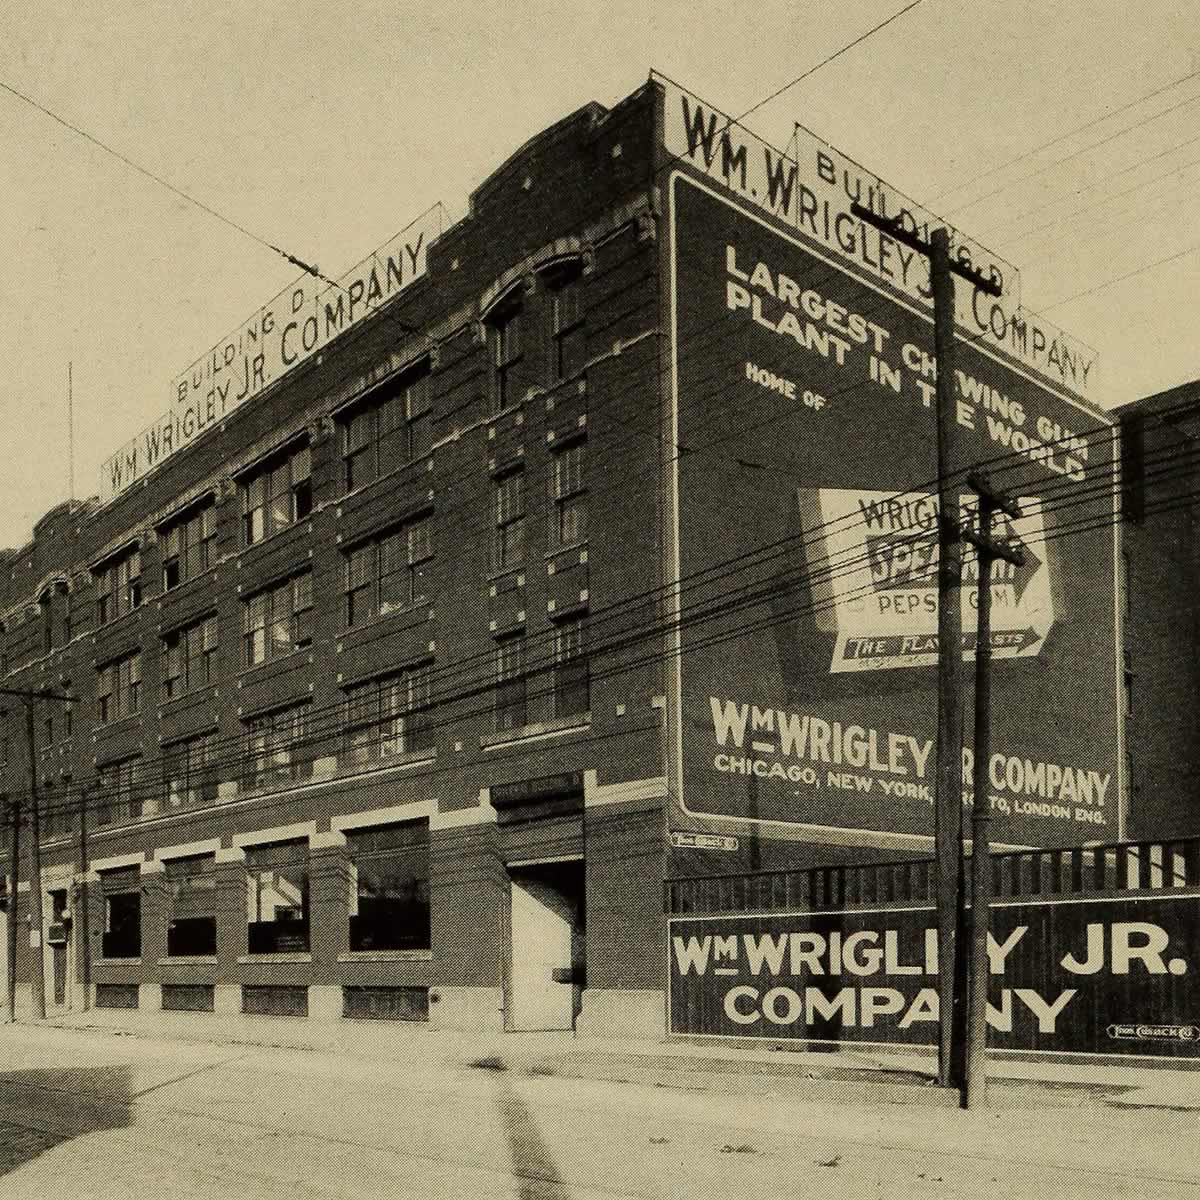 Black and white photograph of a large brick industrial building with a large advertisement for Wrigley chewing gum on one of its walls.